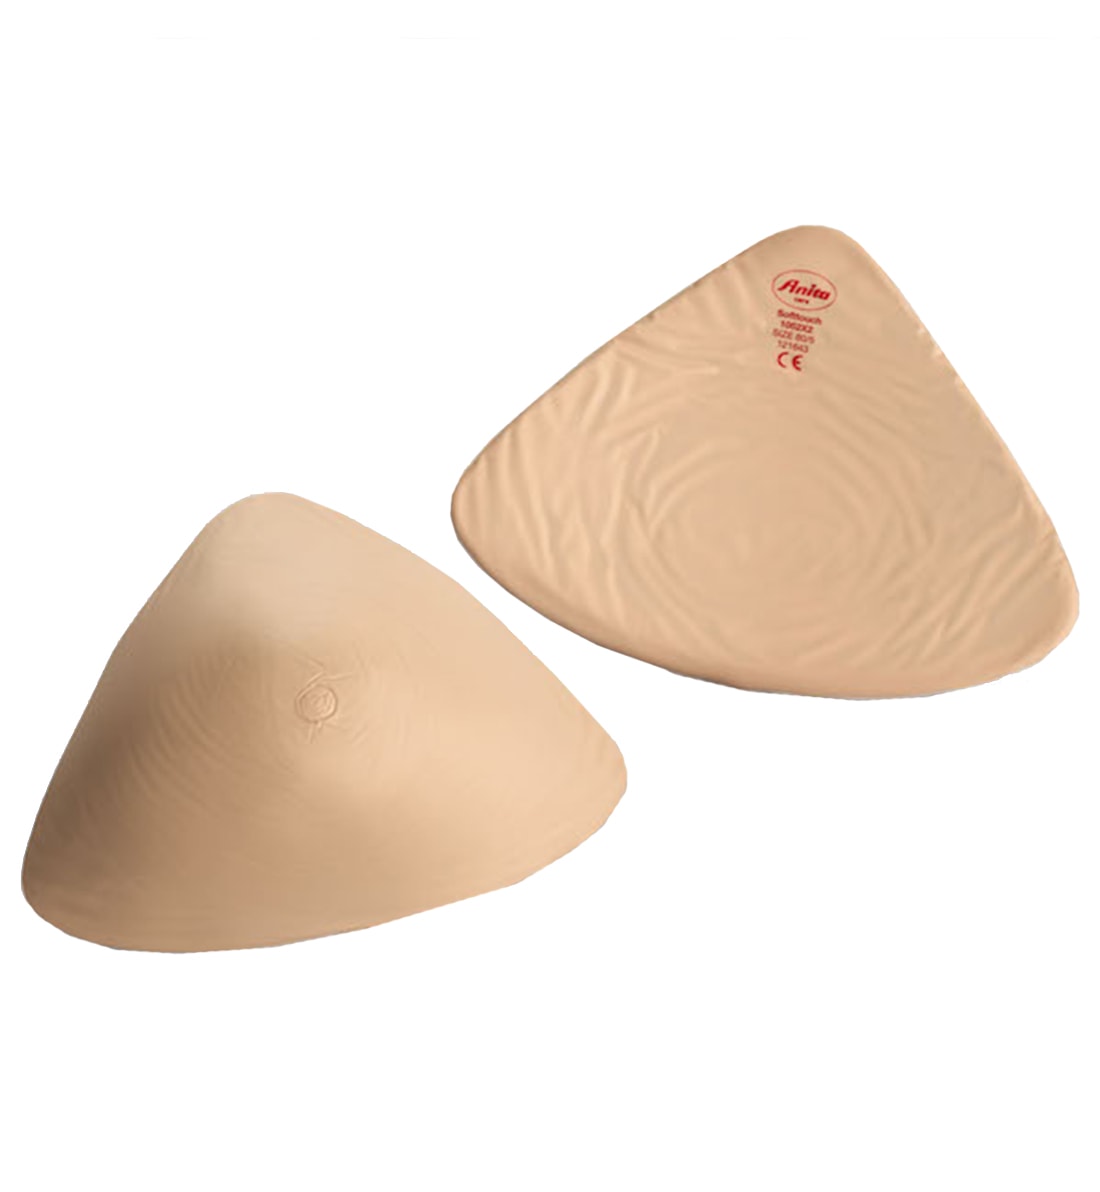 Anita Care Softtouch Silicone Breast Form (1052X2),Size 5 - Skin,5